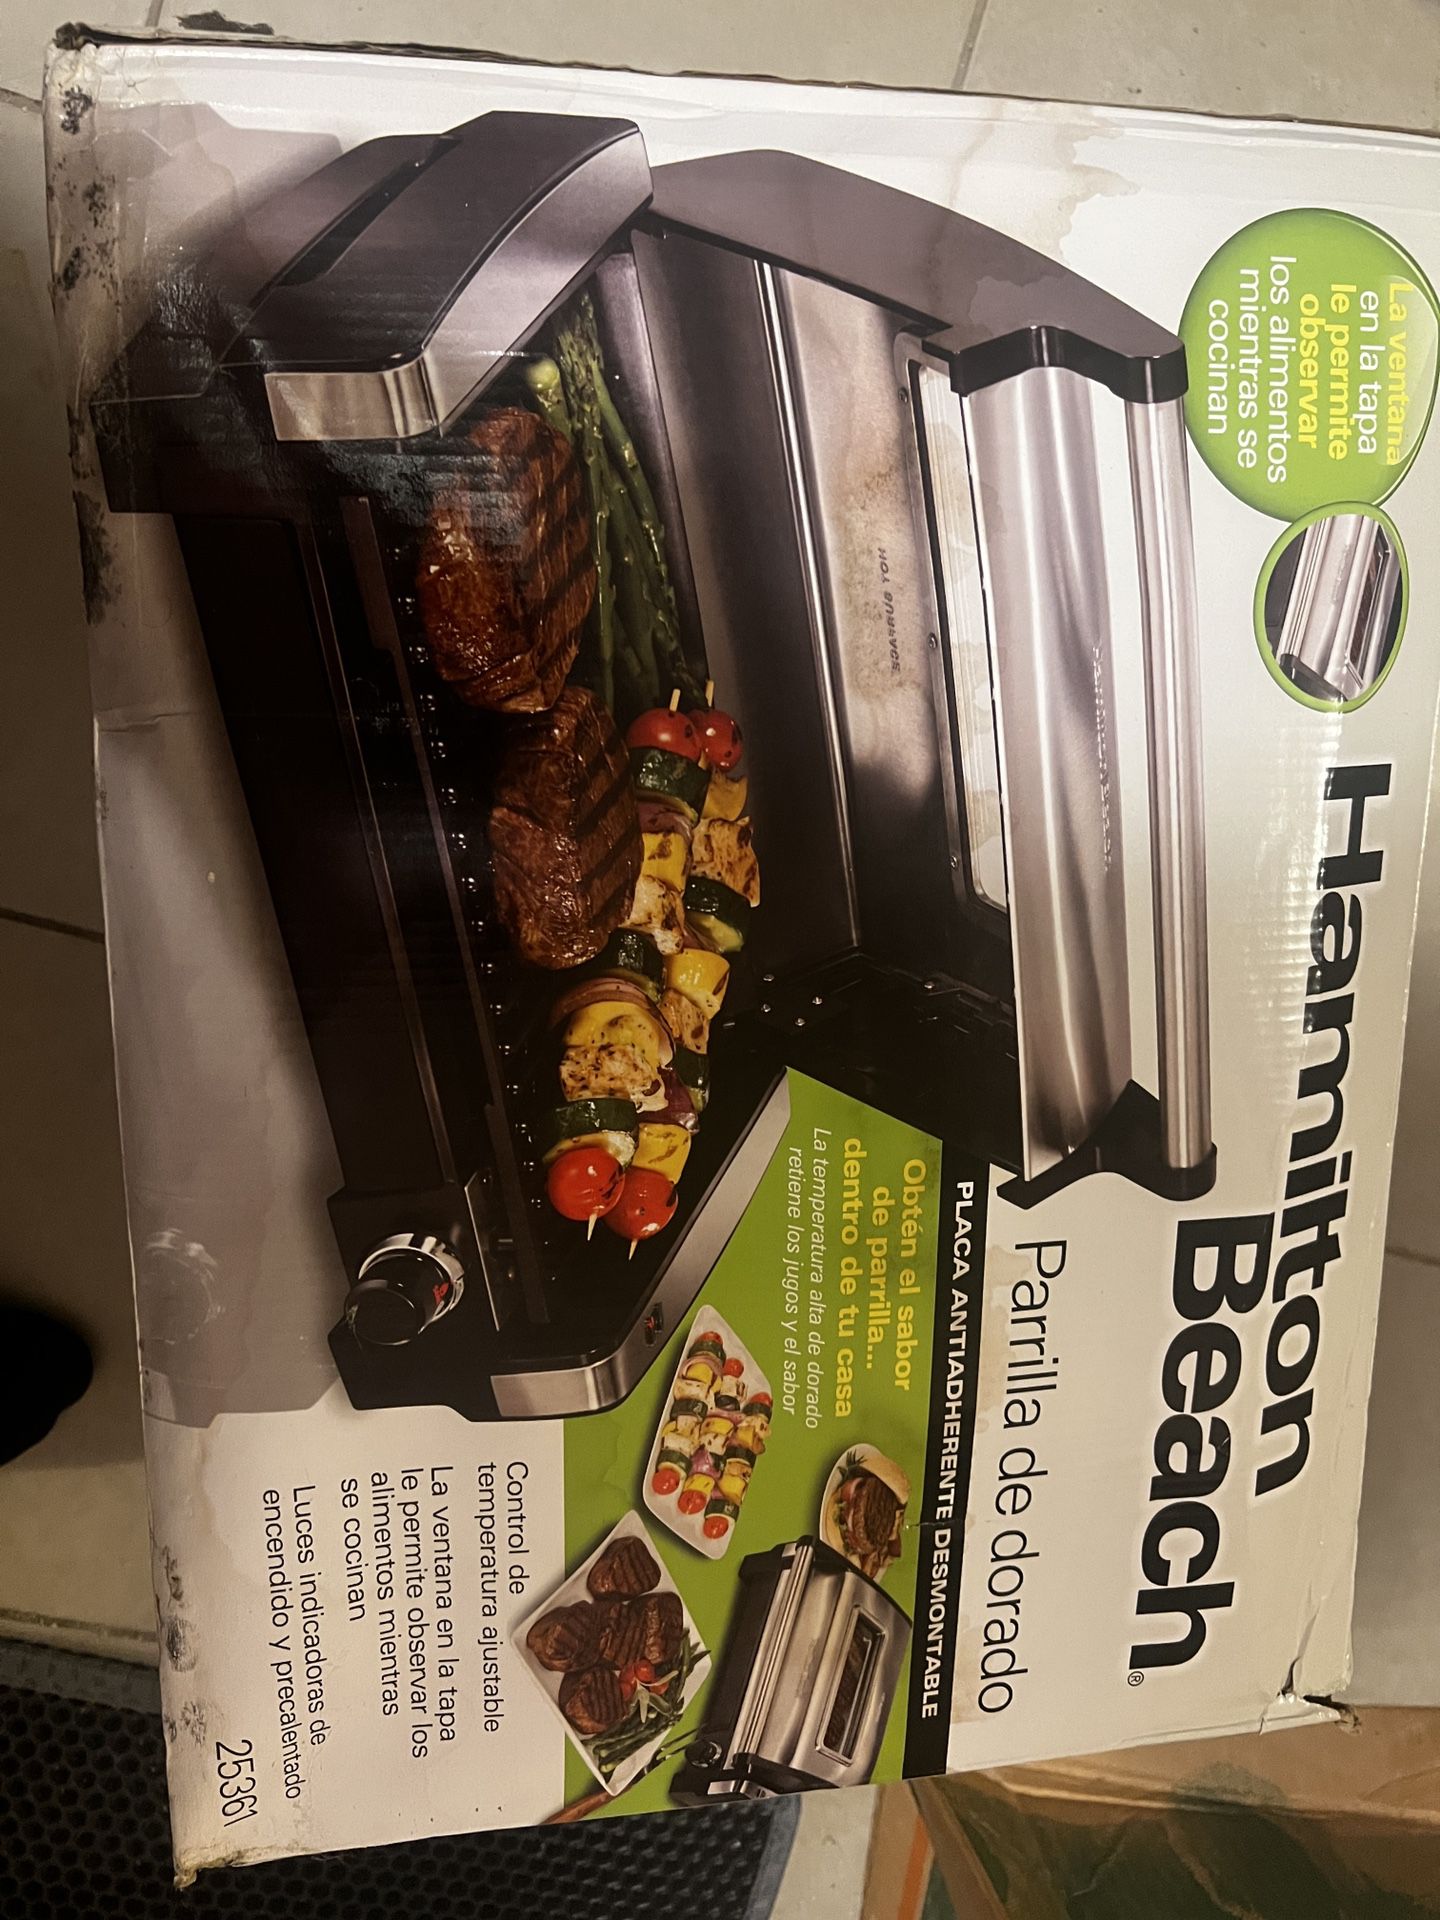 Hamilton Beach Electric Indoor Searing Grill with Viewing Window &  Adjustable Temperature Control to 450F, 118 sq. in. Surface Serves 6,  Removable Non for Sale in Chicago, IL - OfferUp